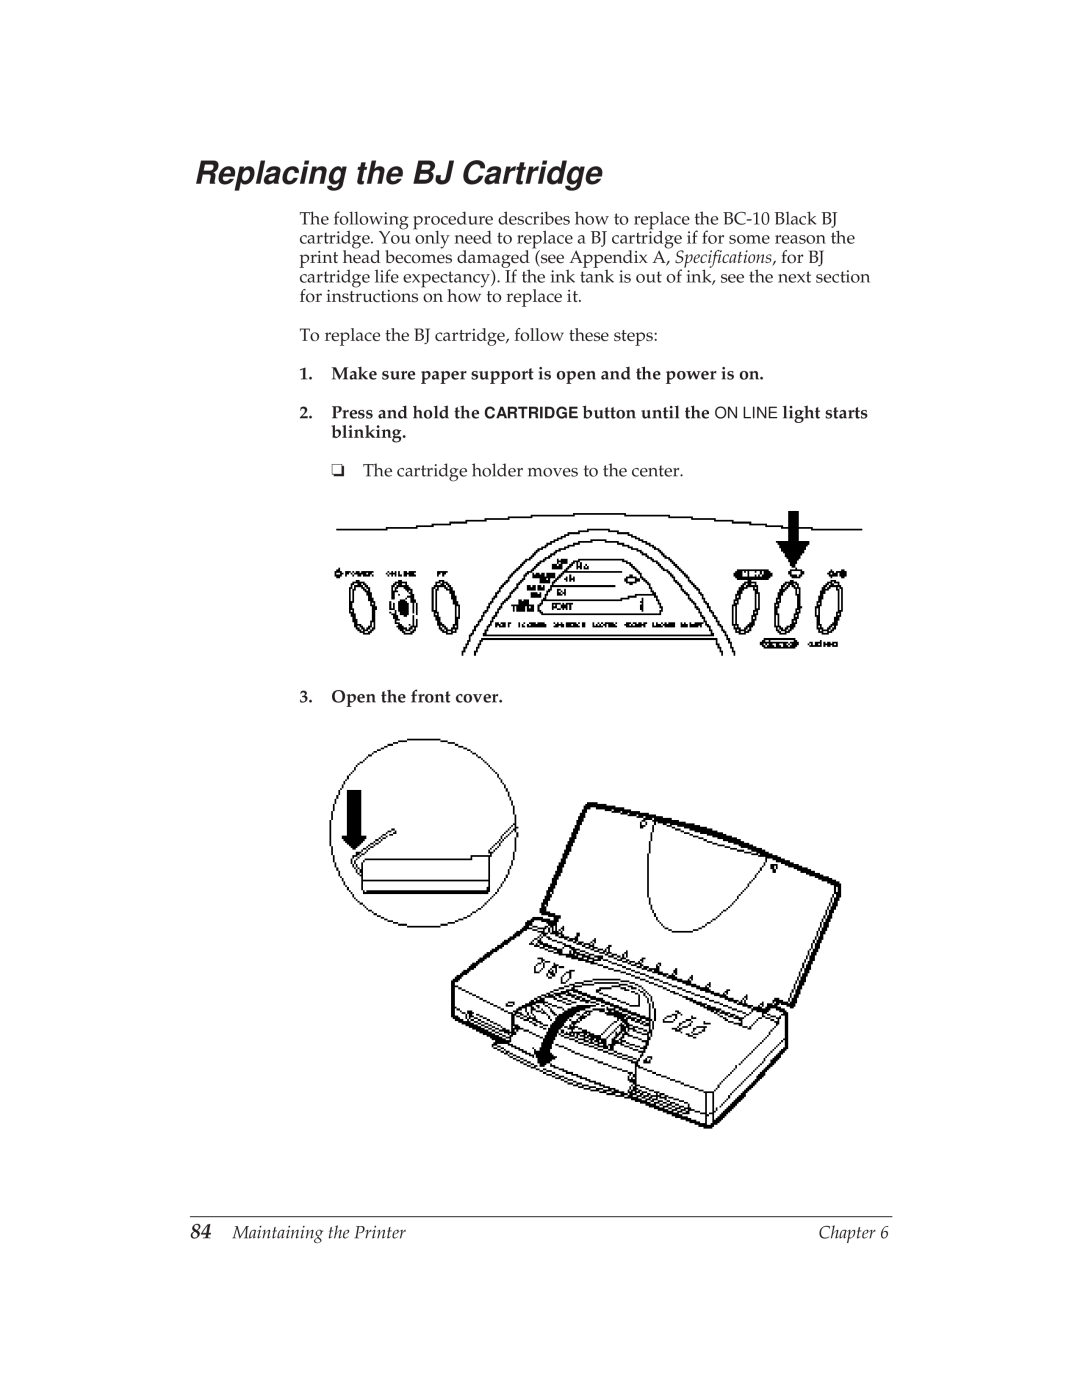 Canon BJ-30 manual Replacing the BJ Cartridge, Make sure paper support is open and the power is on, Open the front cover 